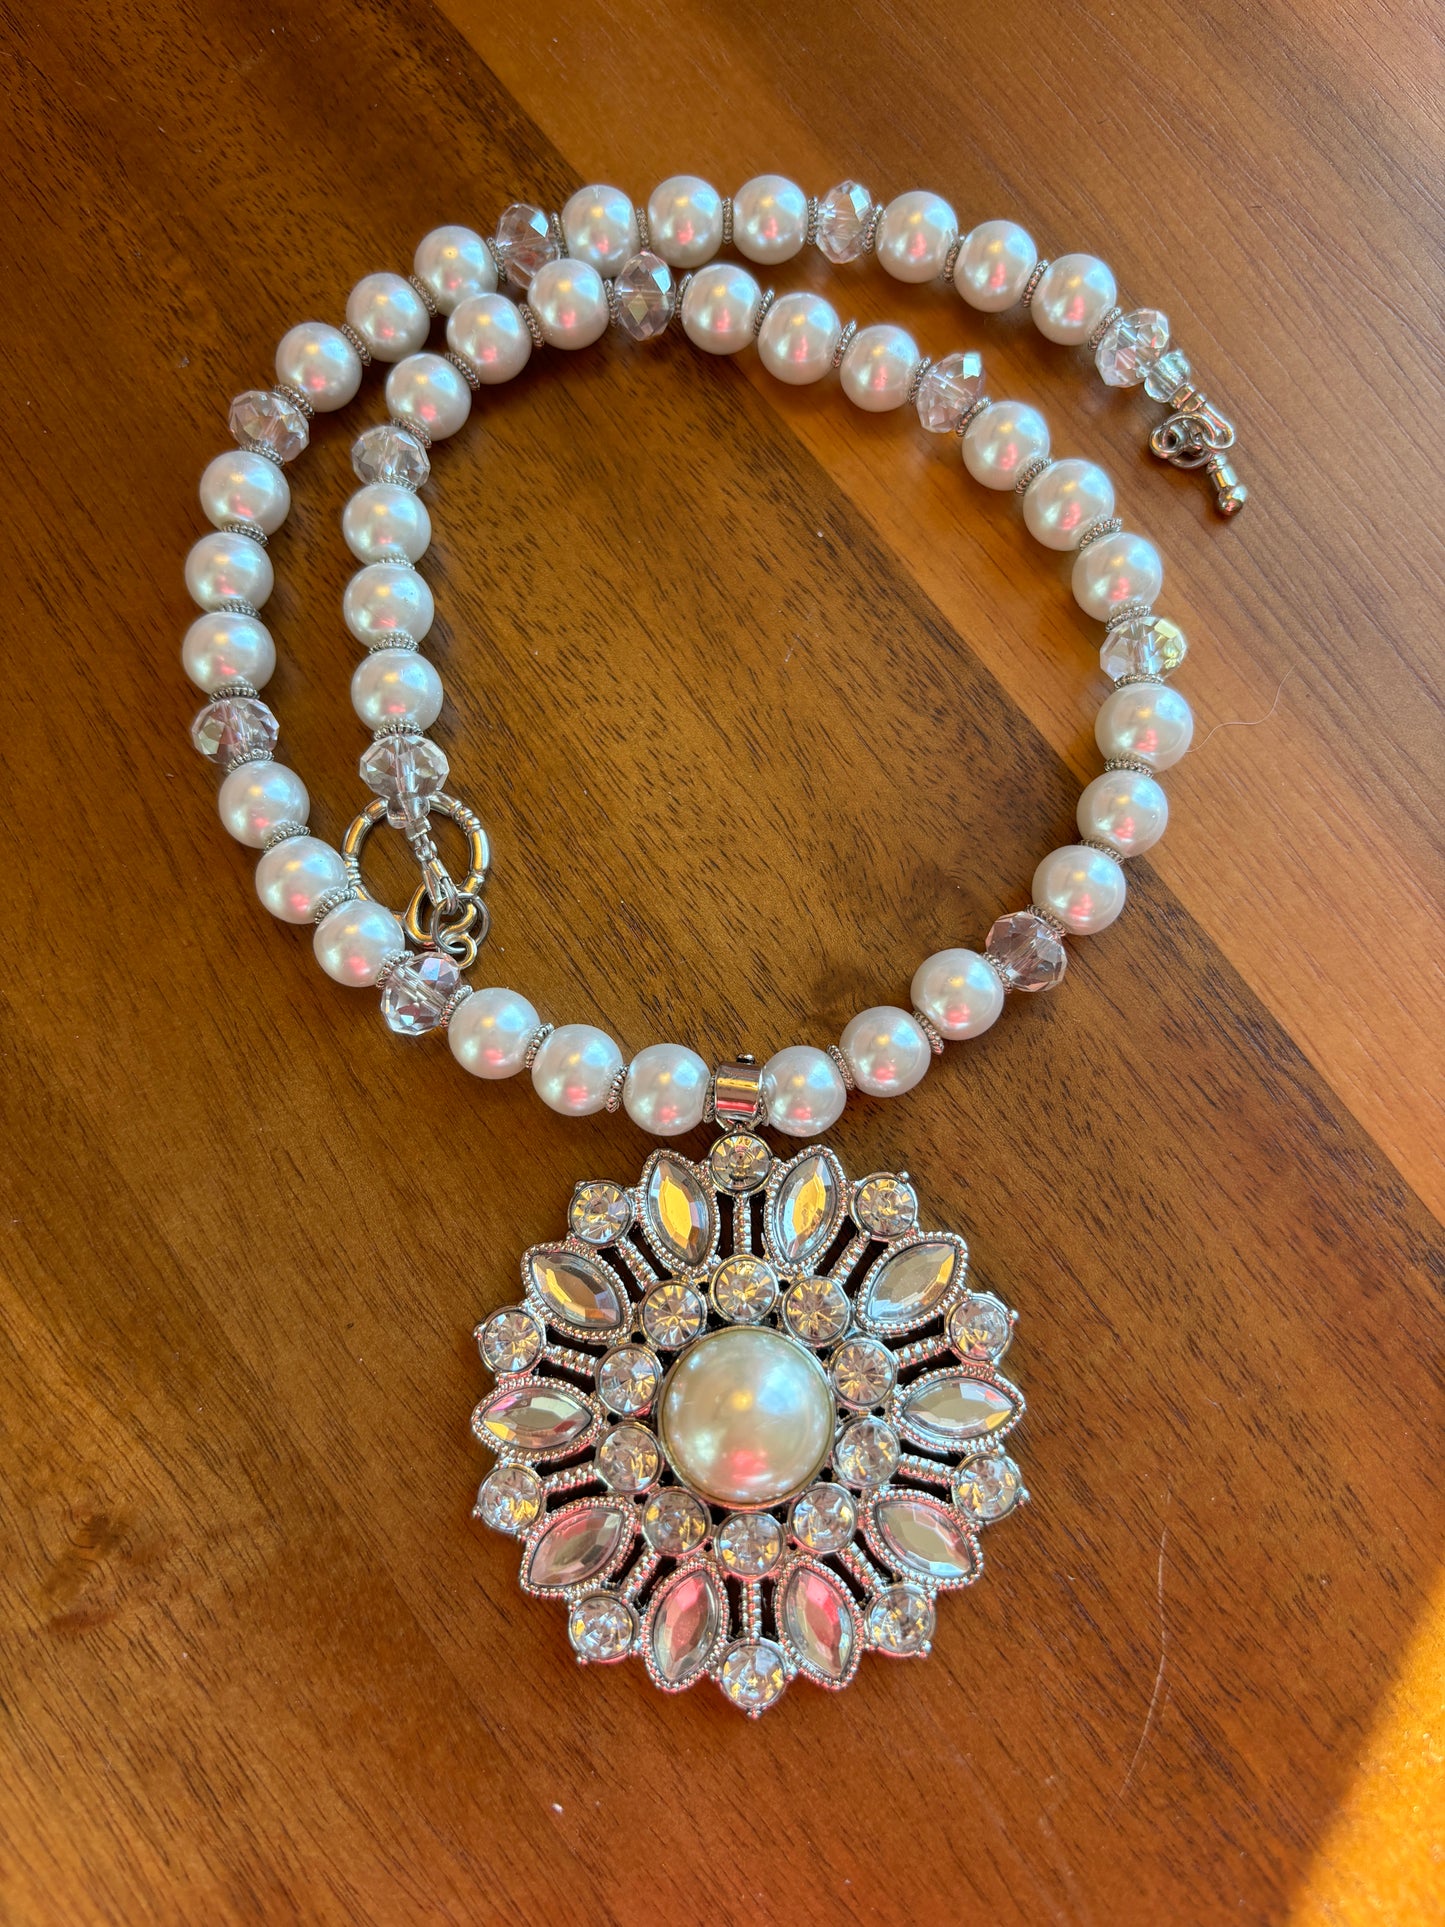 Floral White Pearl and Crystal Necklace 2" Flower Pendant, SALE!